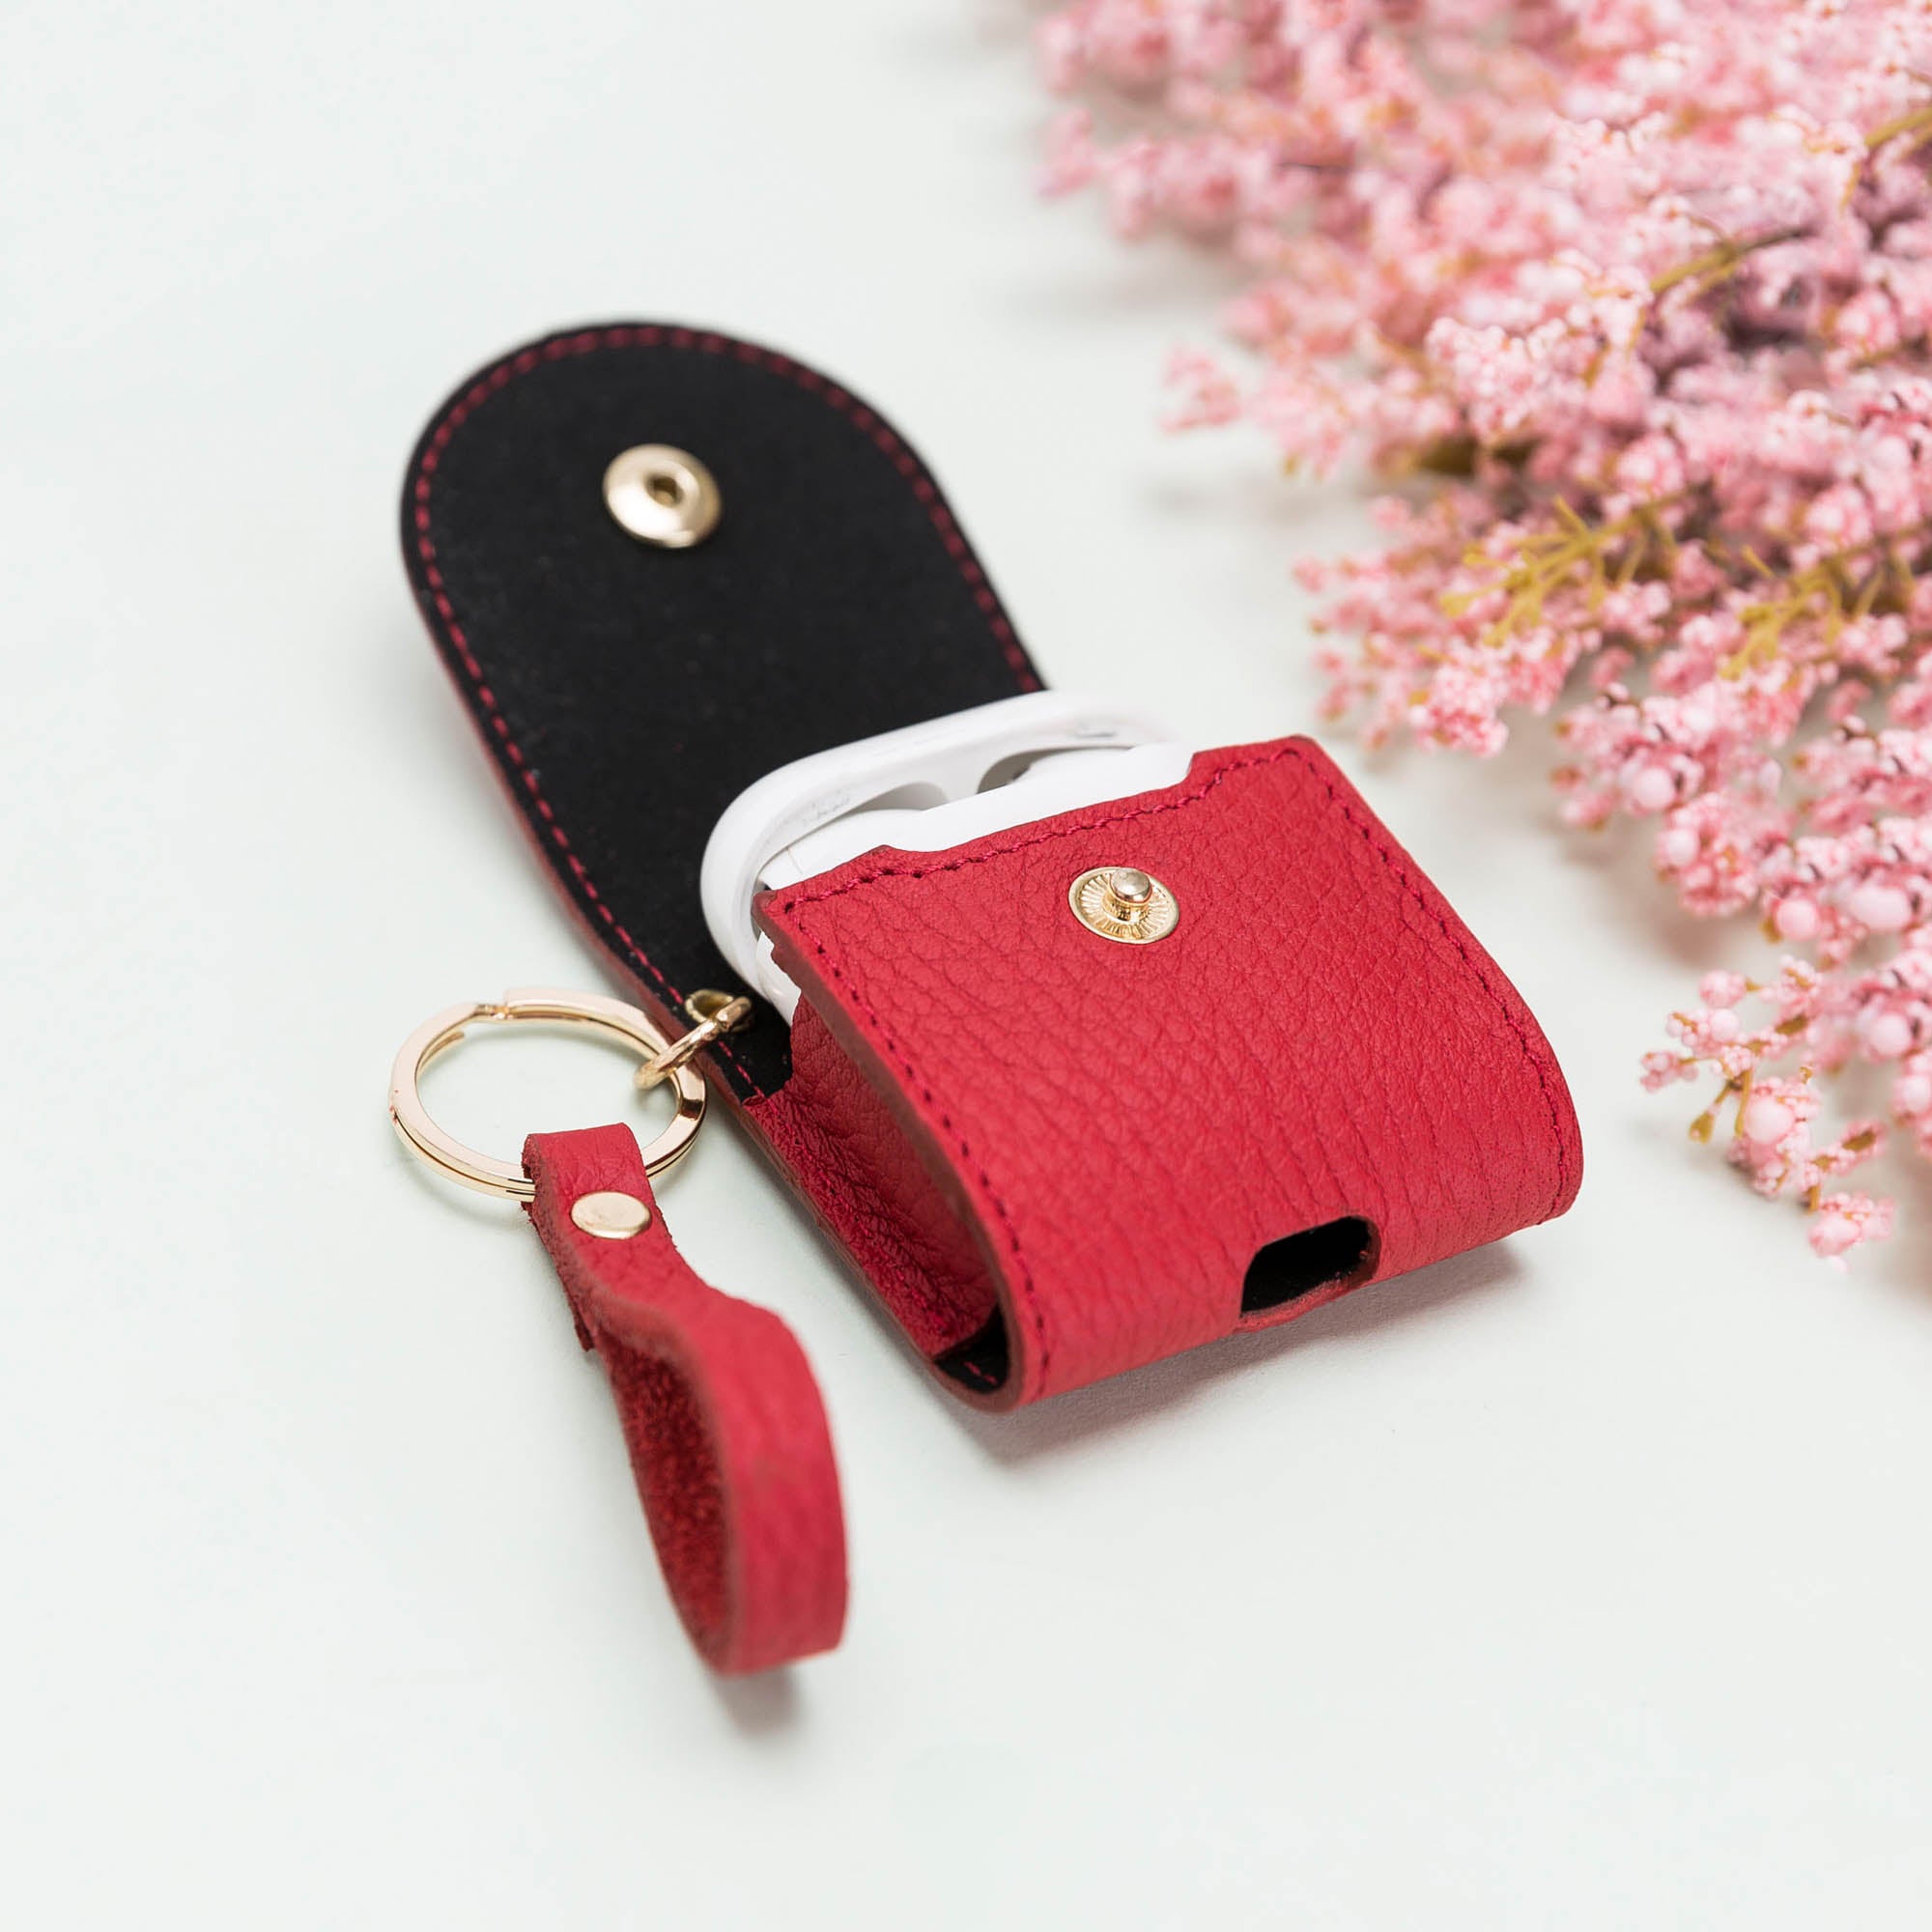 Mai Leather Case for AirPods 1 & 2 - RED - saracleather